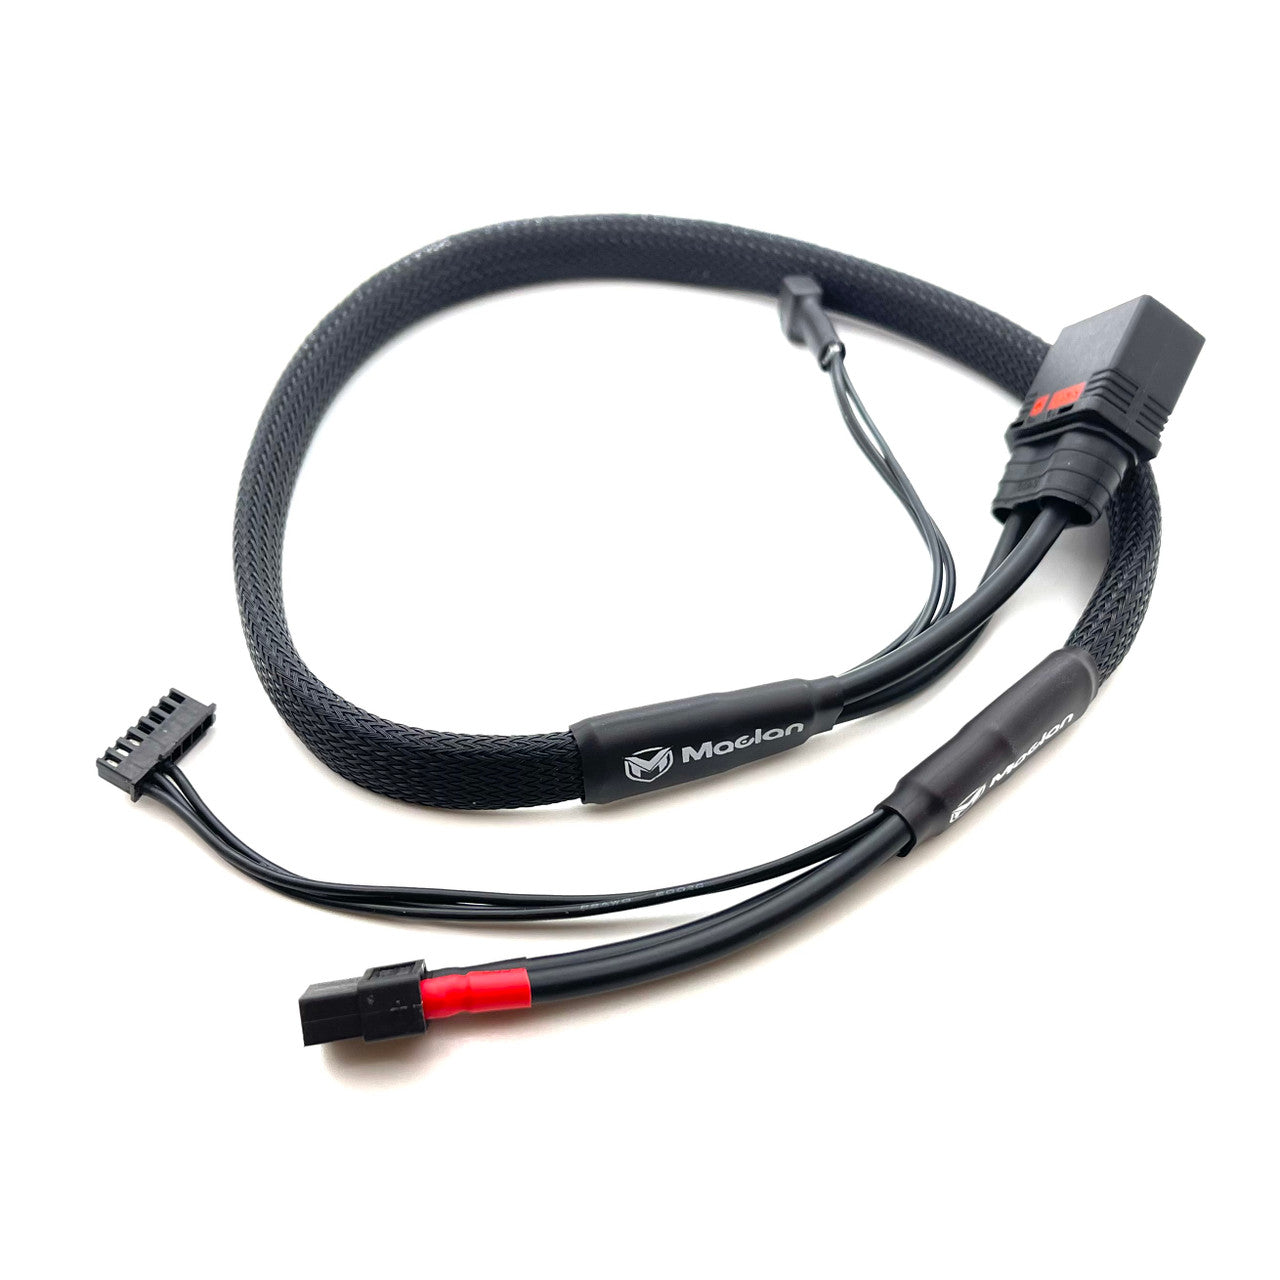 Maclan Max Current 2S (QS8 battery) Charge Cable.